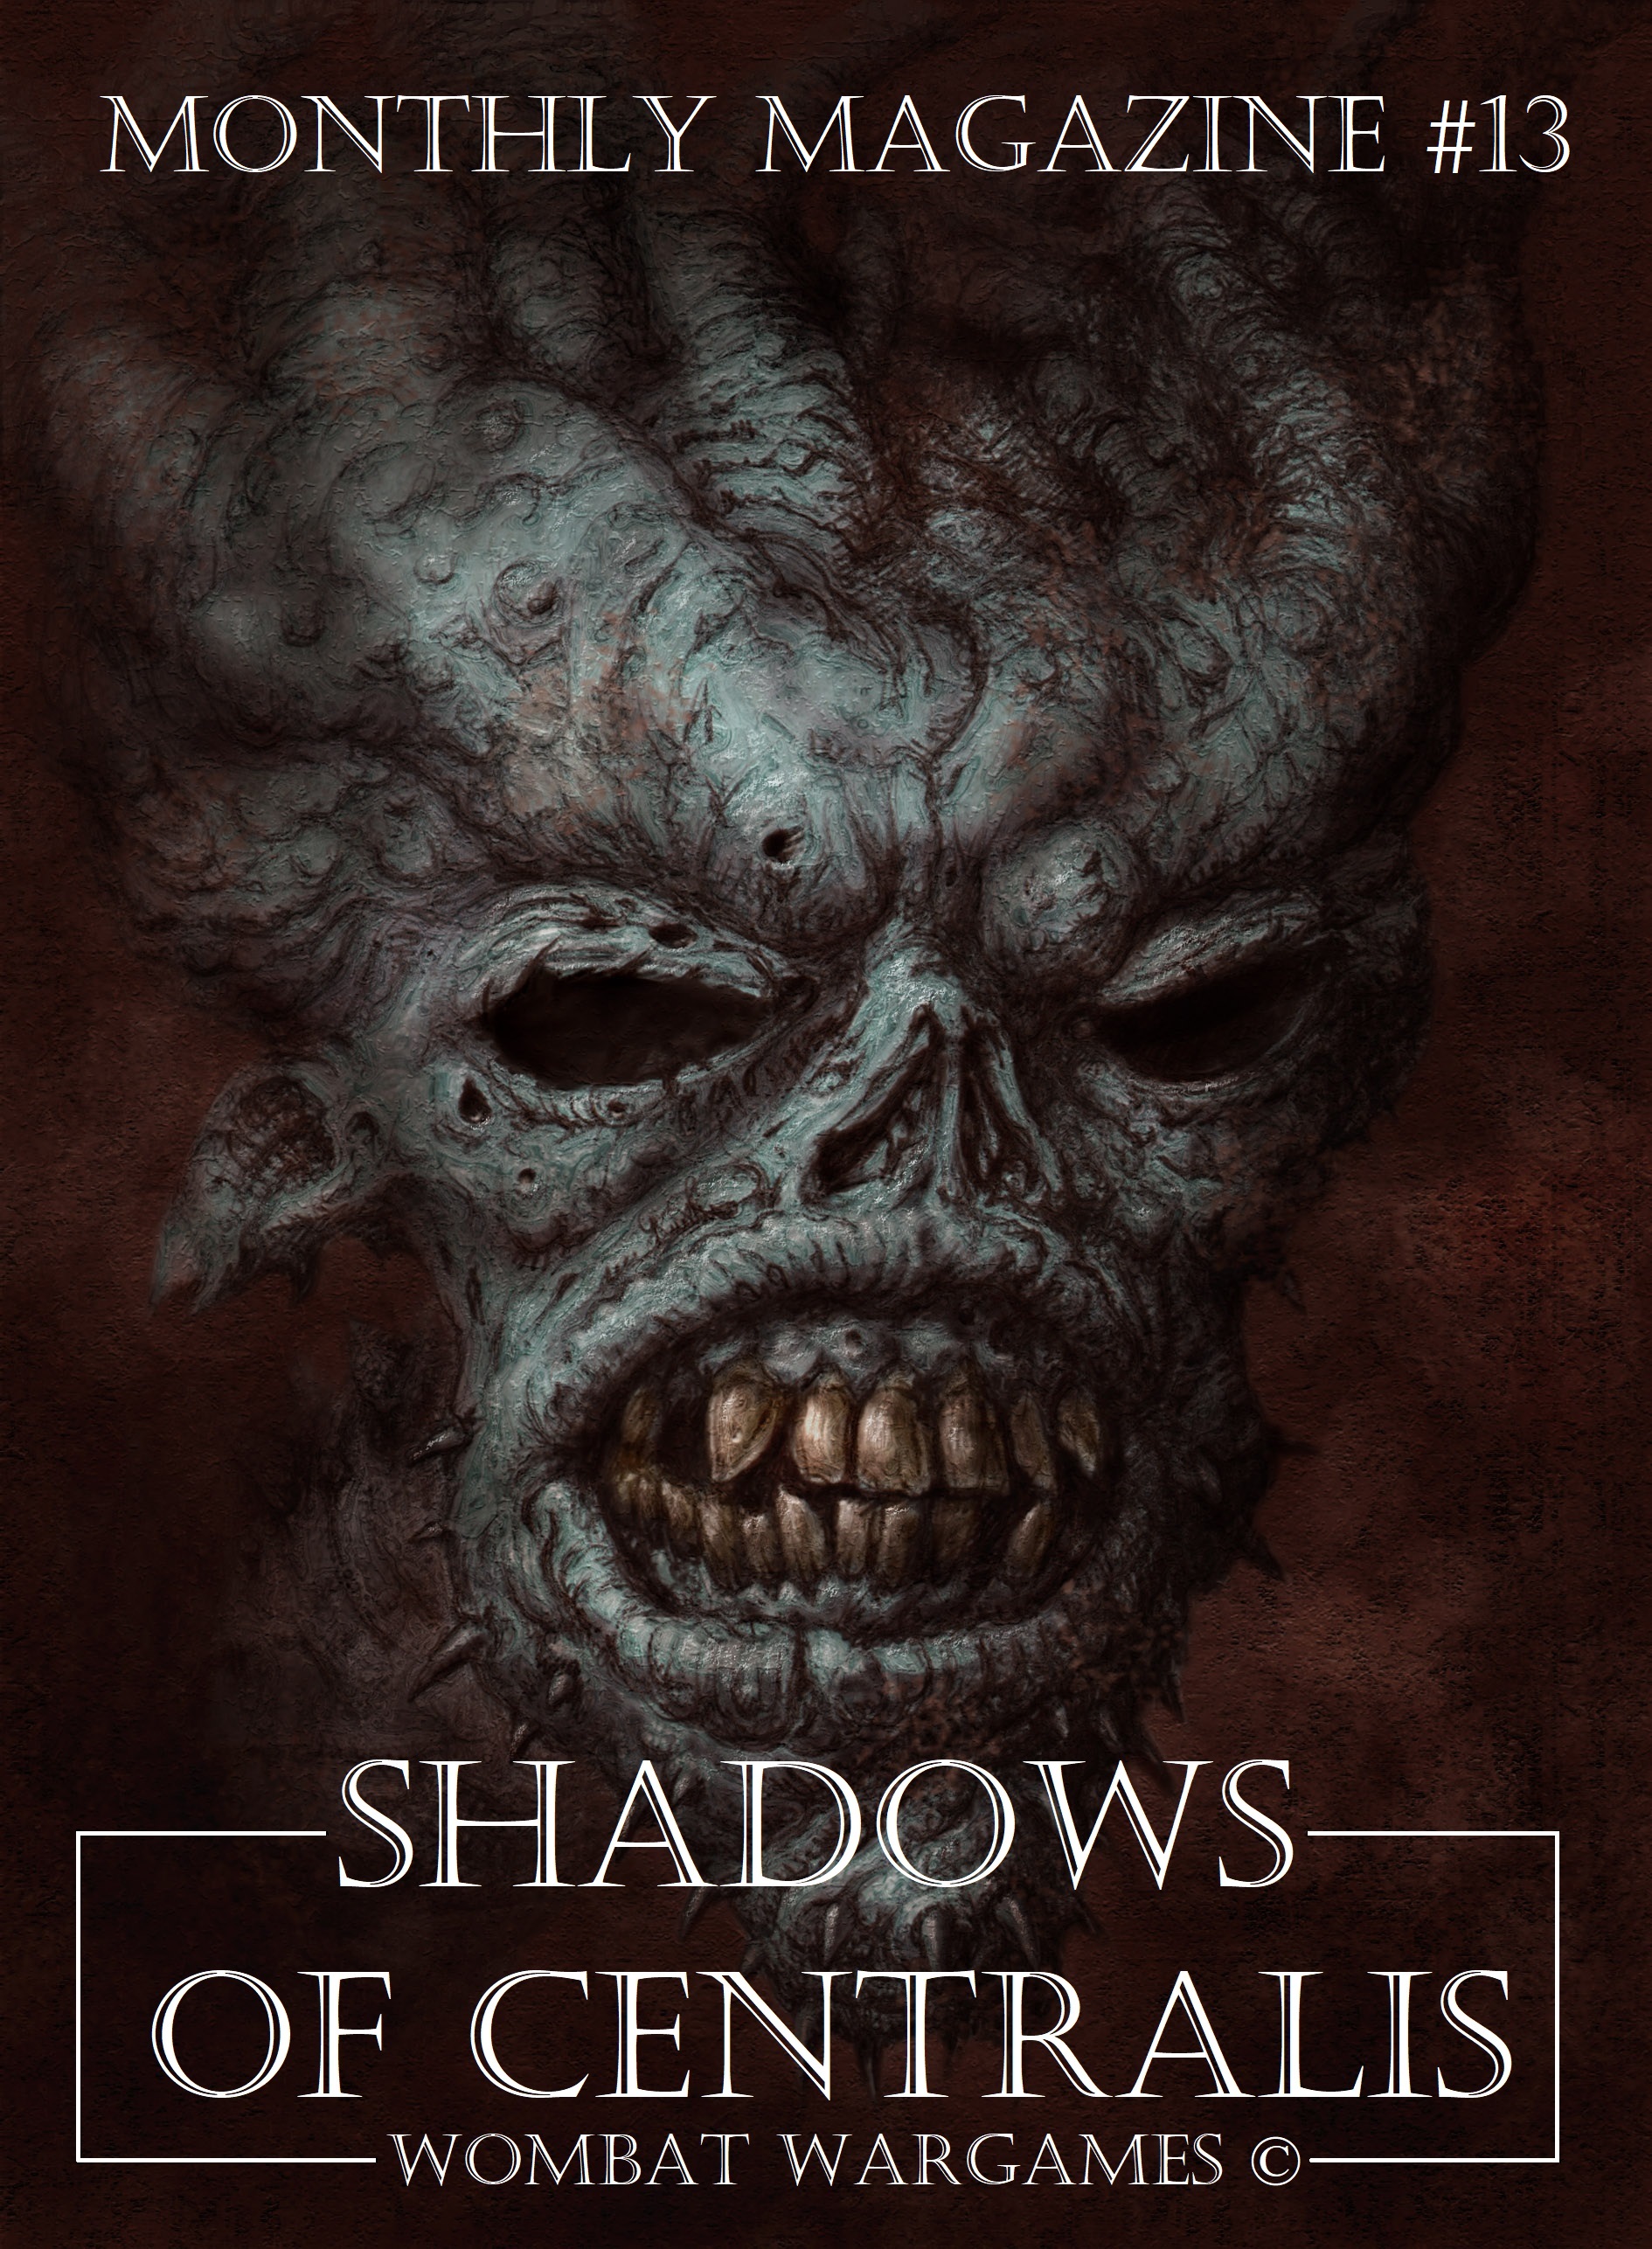 Shadows of Centralis Monthly Magazine #13 by Wombat Wargames